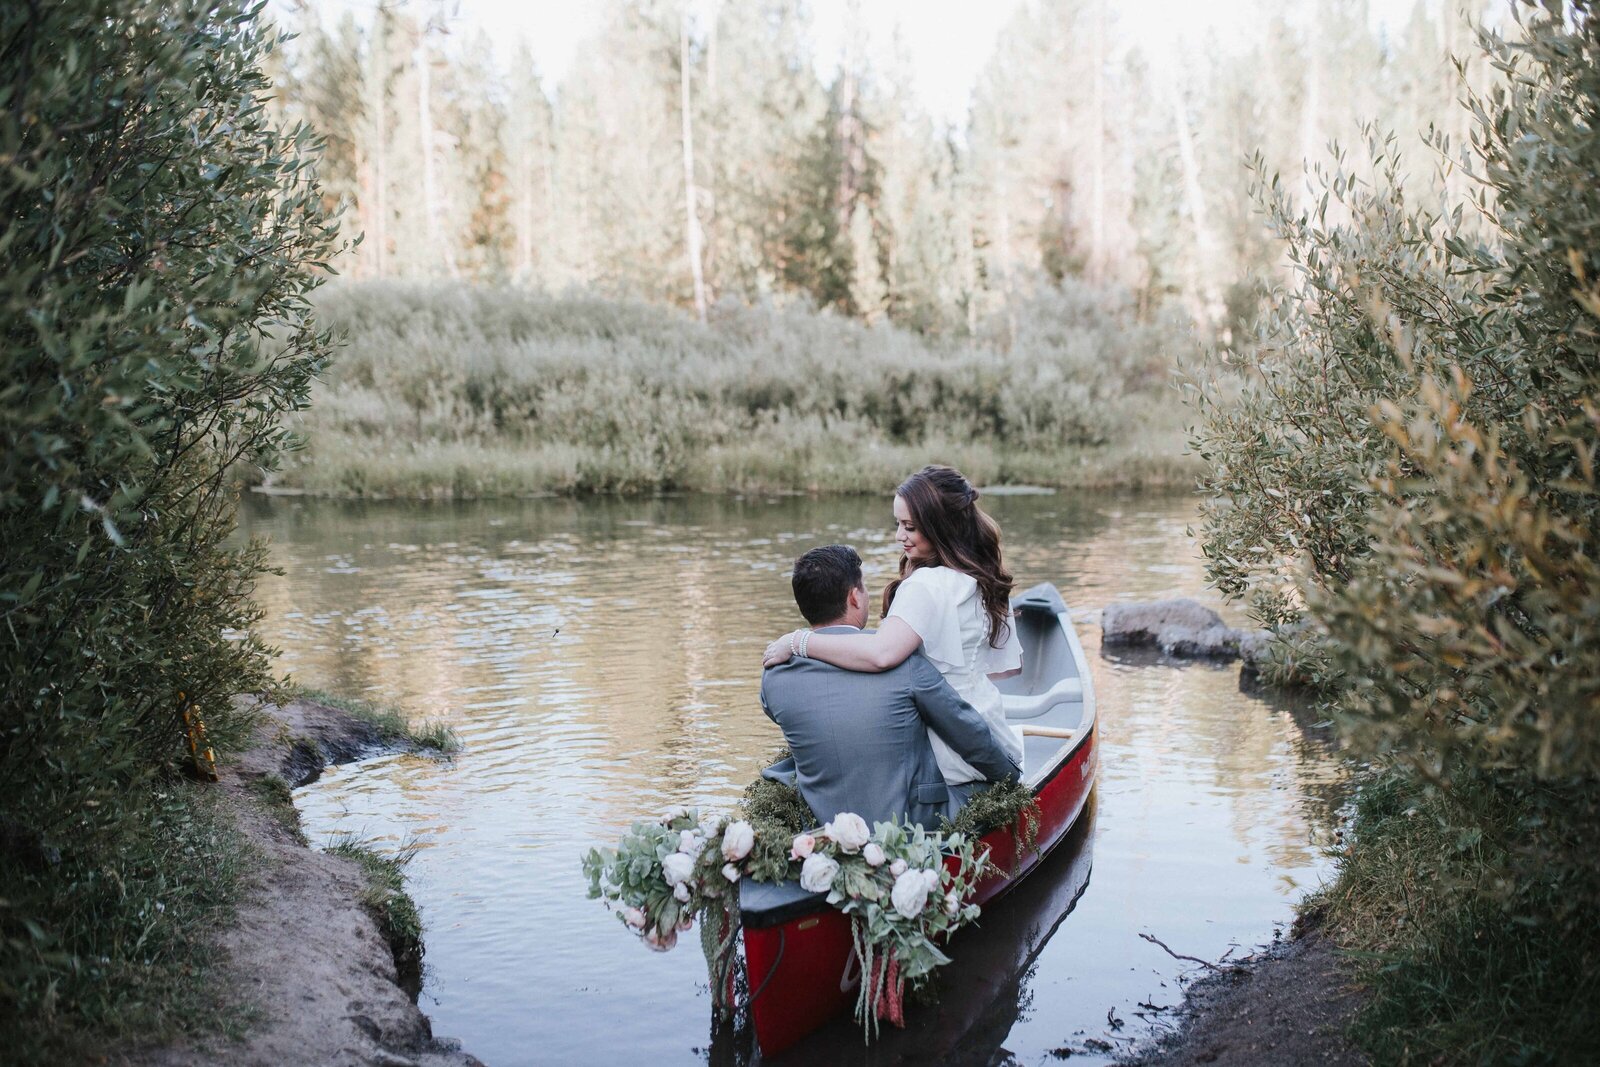 Lake Tahoe wedding photographer captures  bride and groom on canoe during outdoor bridal portraits in Lake Tahoe